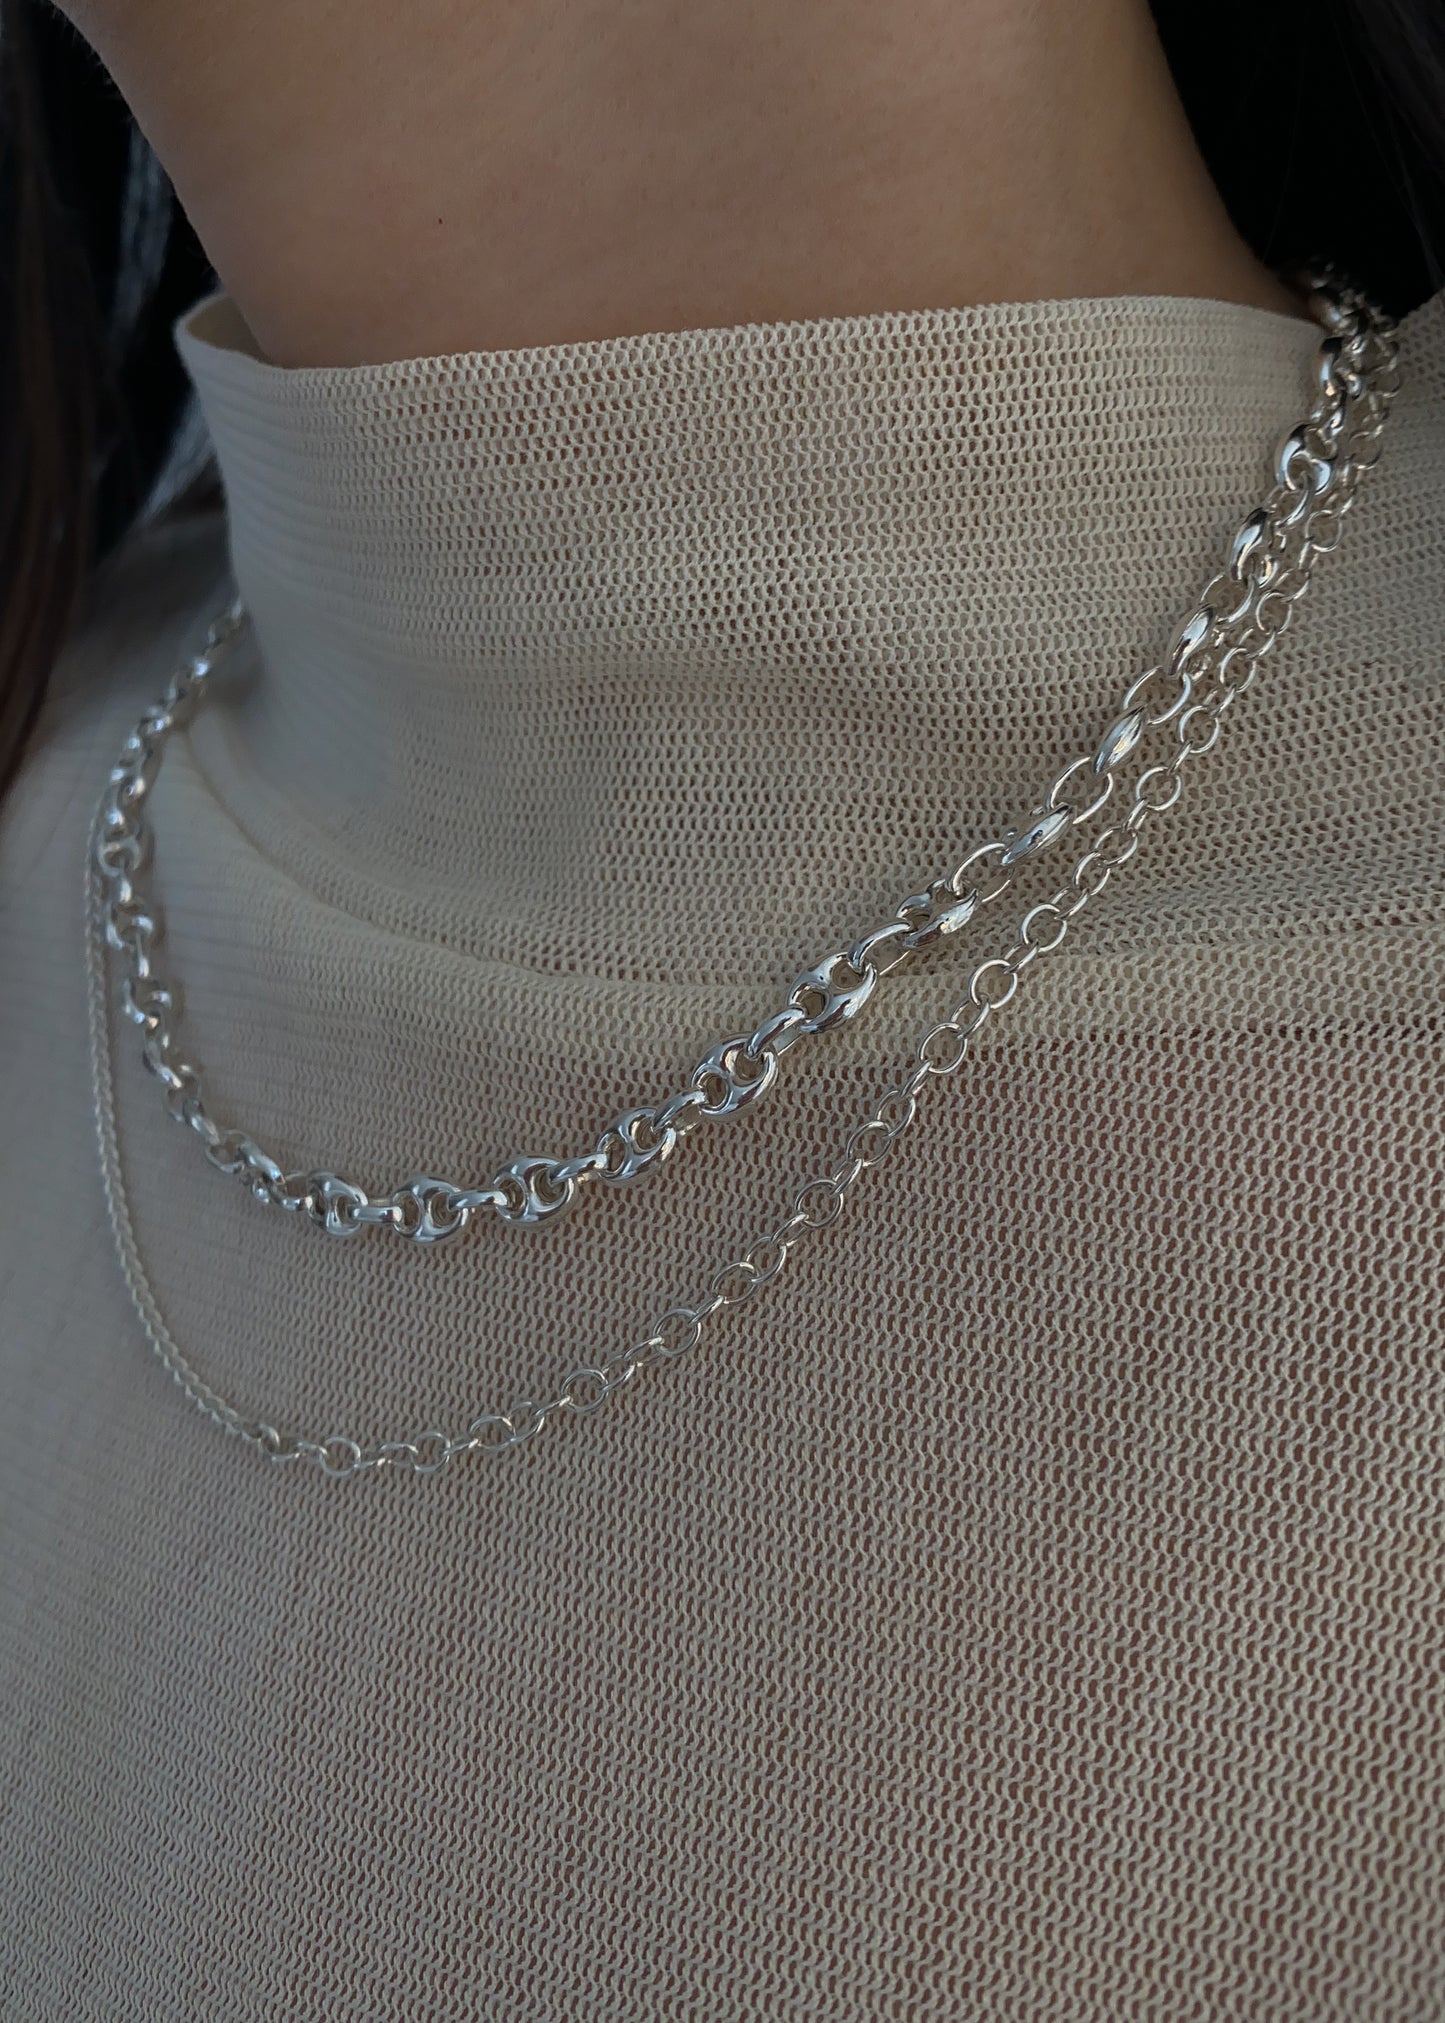 Kharys jewelry two tone double chain necklace in sterling silver